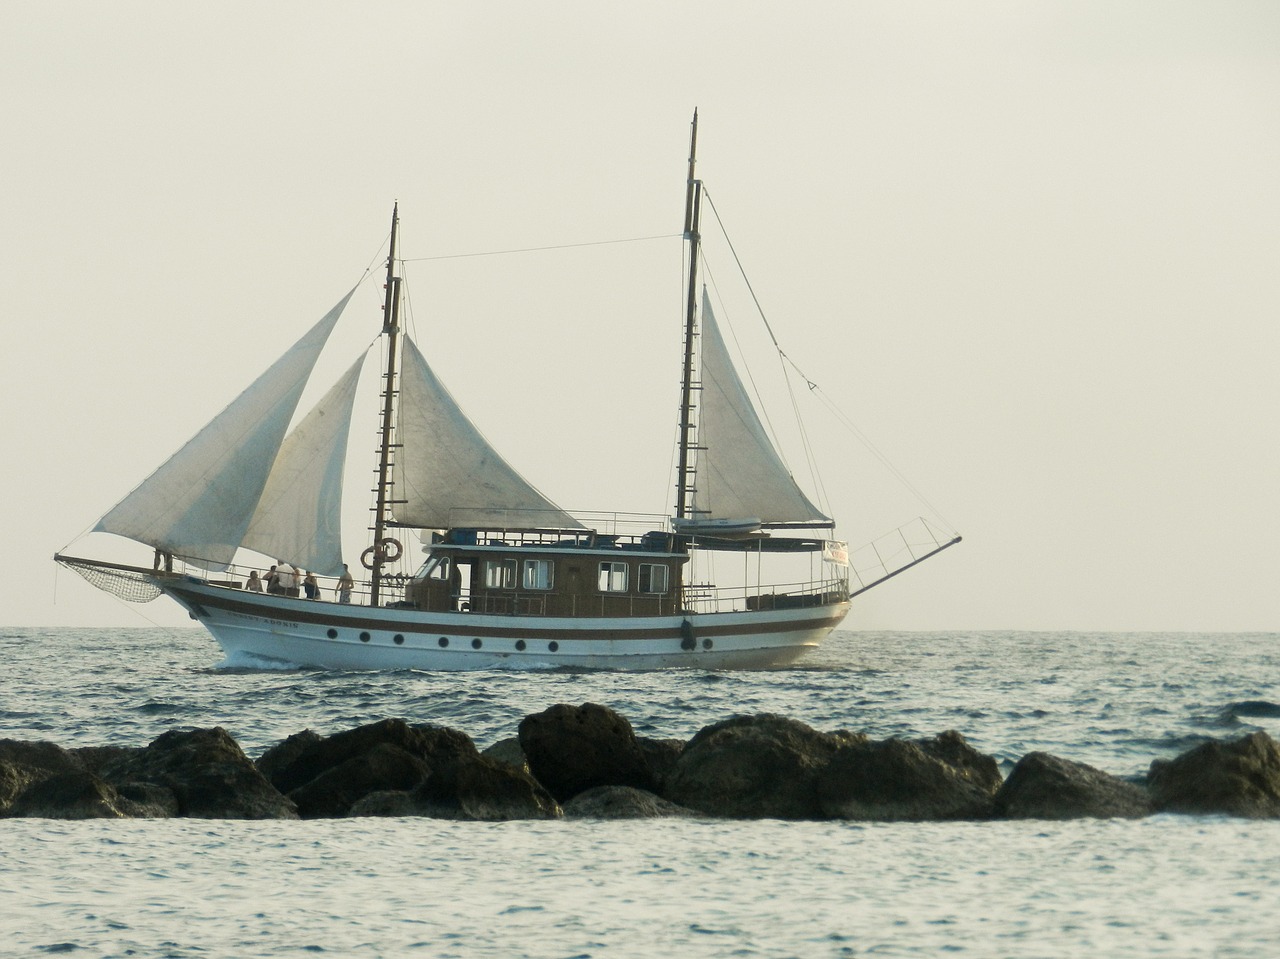 Image - ship sea tourism journey water